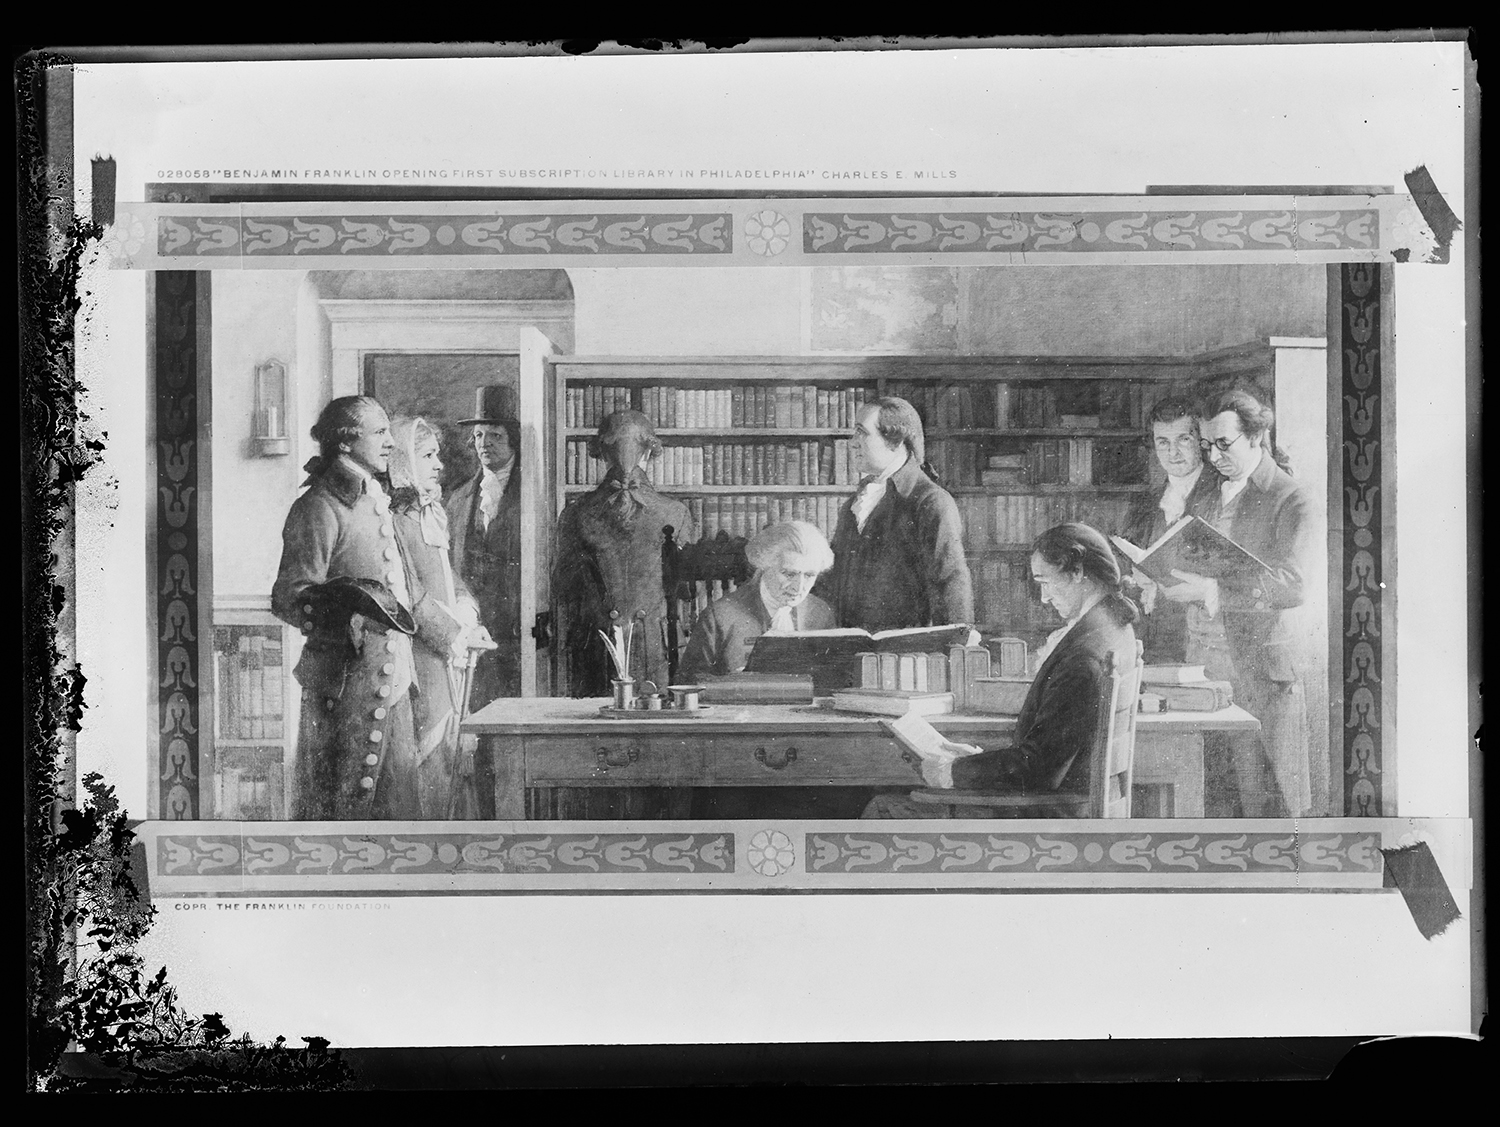 <p><em>Benjamin Franklin opening the first subscription library in Philadelphia</em> (Charles E. Mills, c. 1912). Photograph of a mural, dry plate negative. Source: Library of Congress, Prints and Photographs Division.</p>
